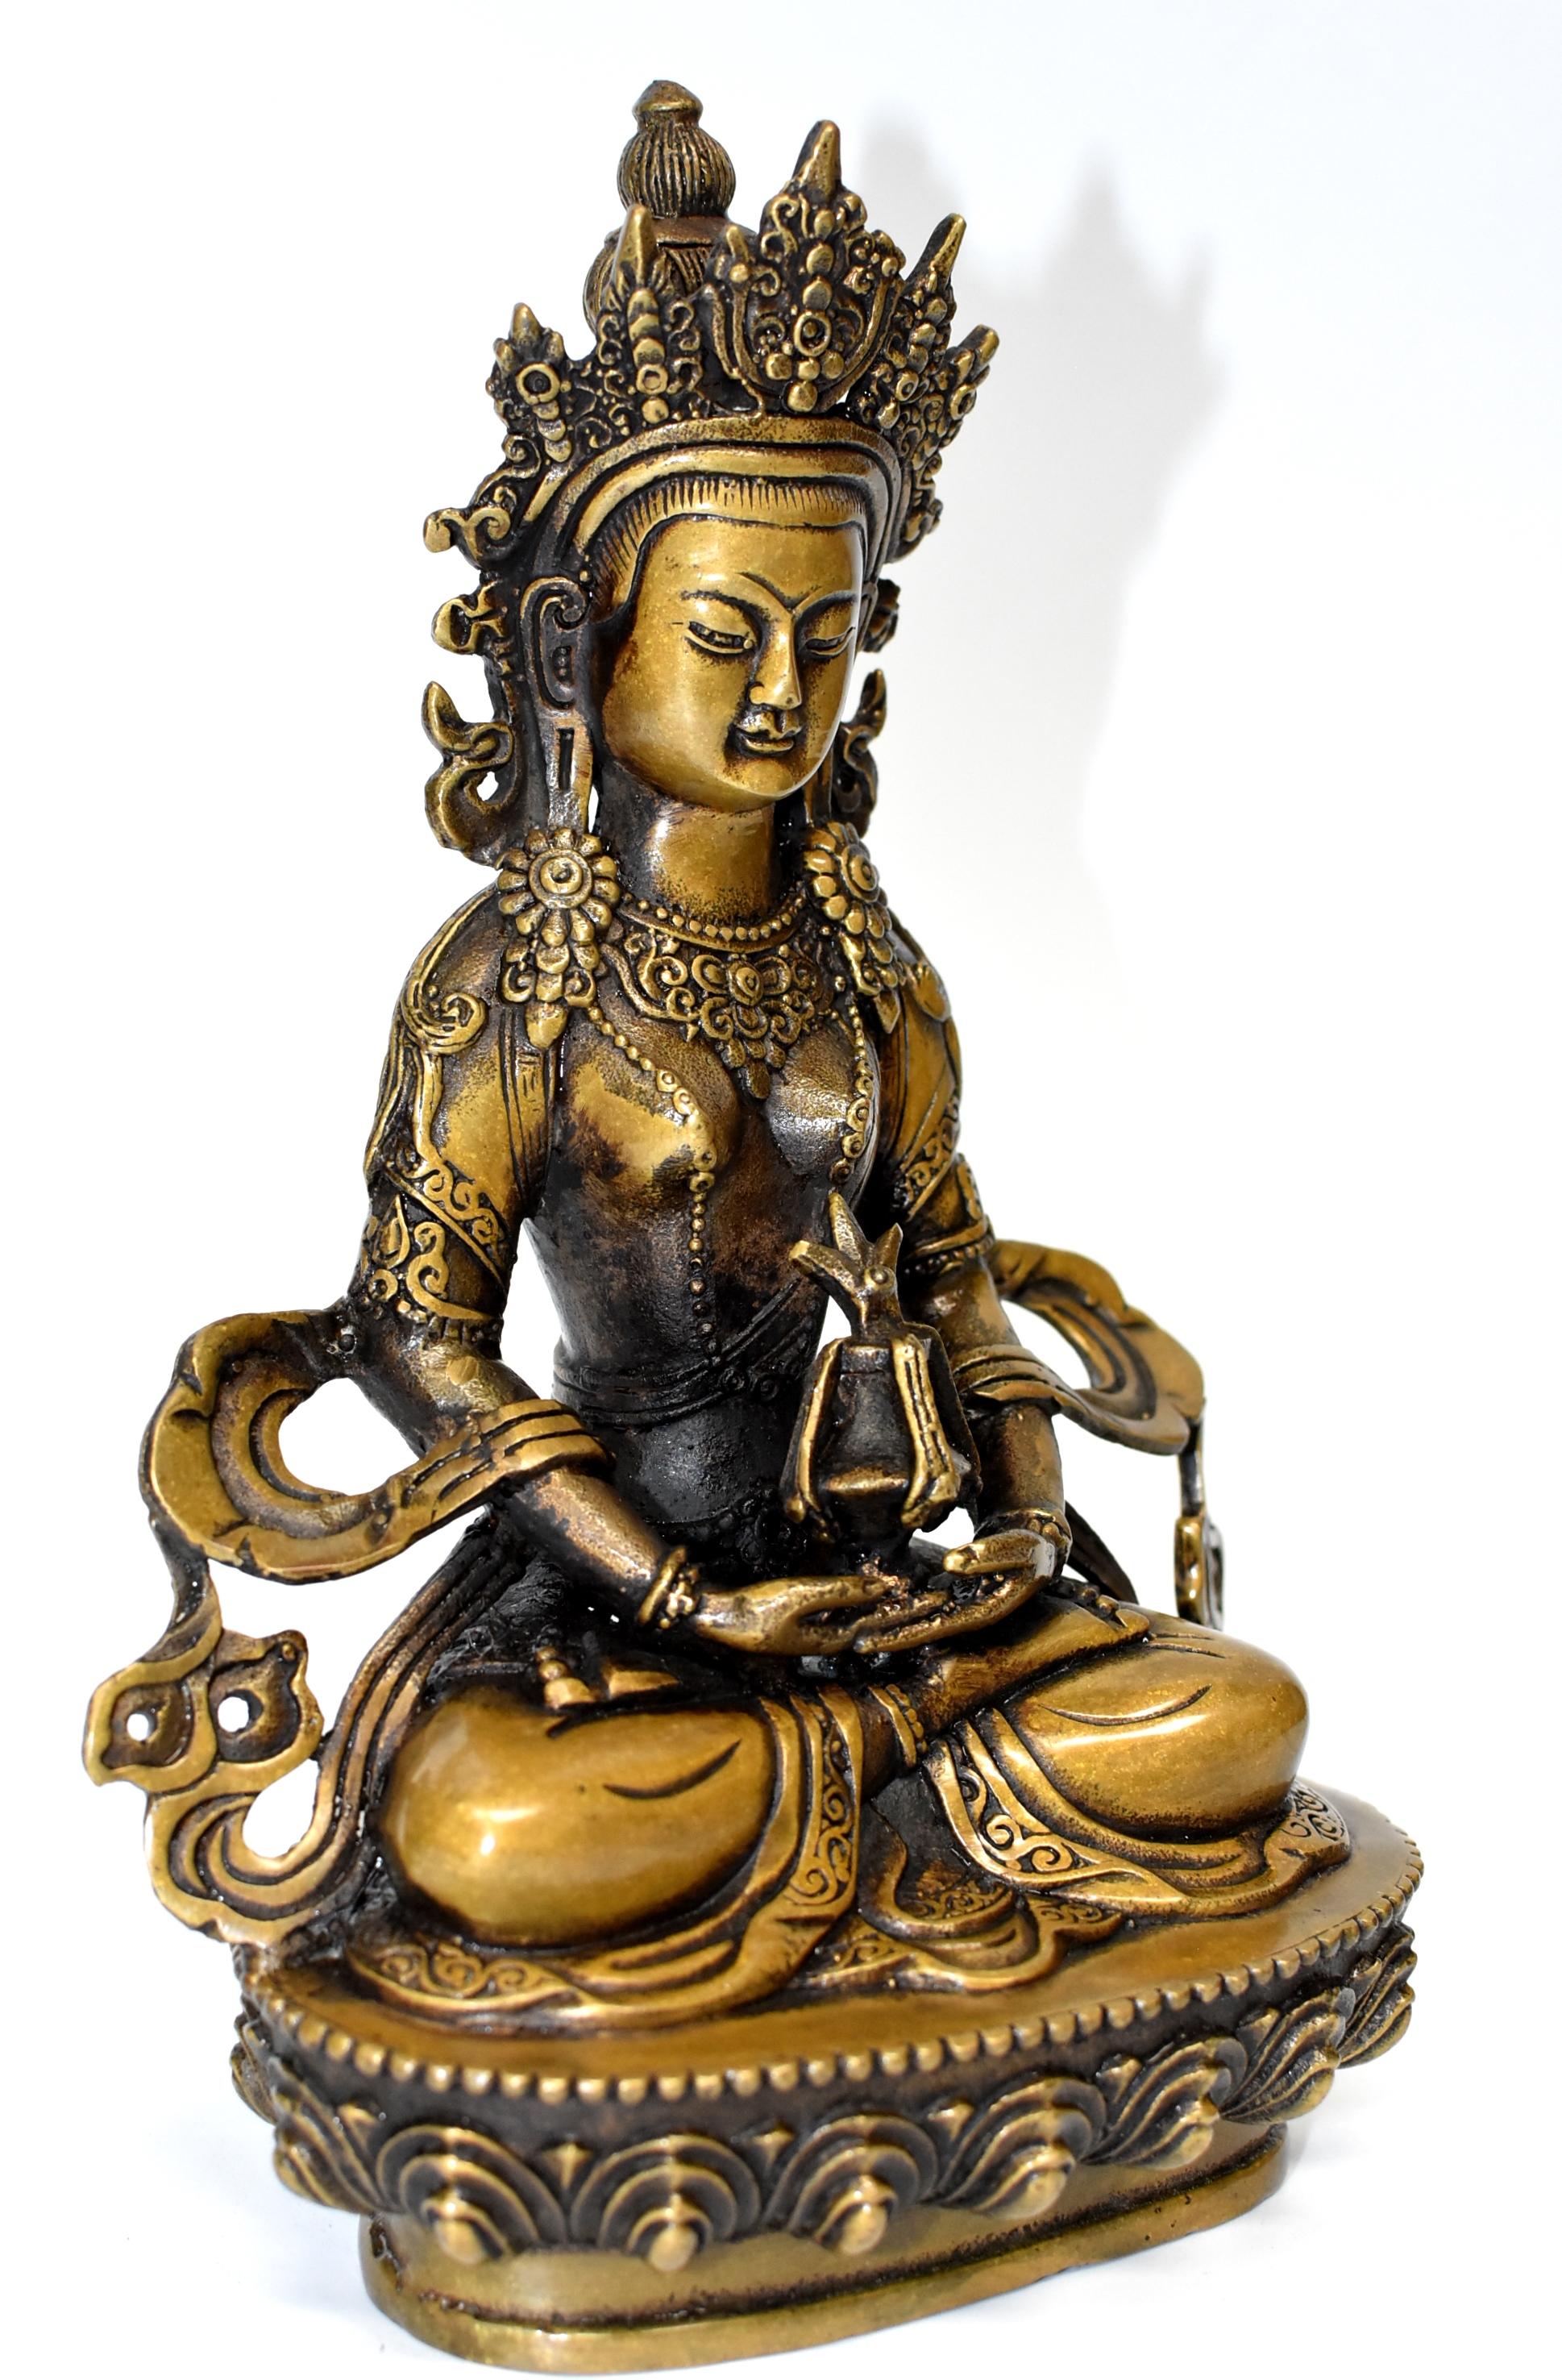 The beautiful bronze sculpture is of The Tibetan Amitayus, the Bodhissatva/Buddha of infinite life. Adorned with necklaces, crown and sashes decorated with rosettes, pearls and medallions, Buddha is seated on a lotus throne, holding Kalasa which is